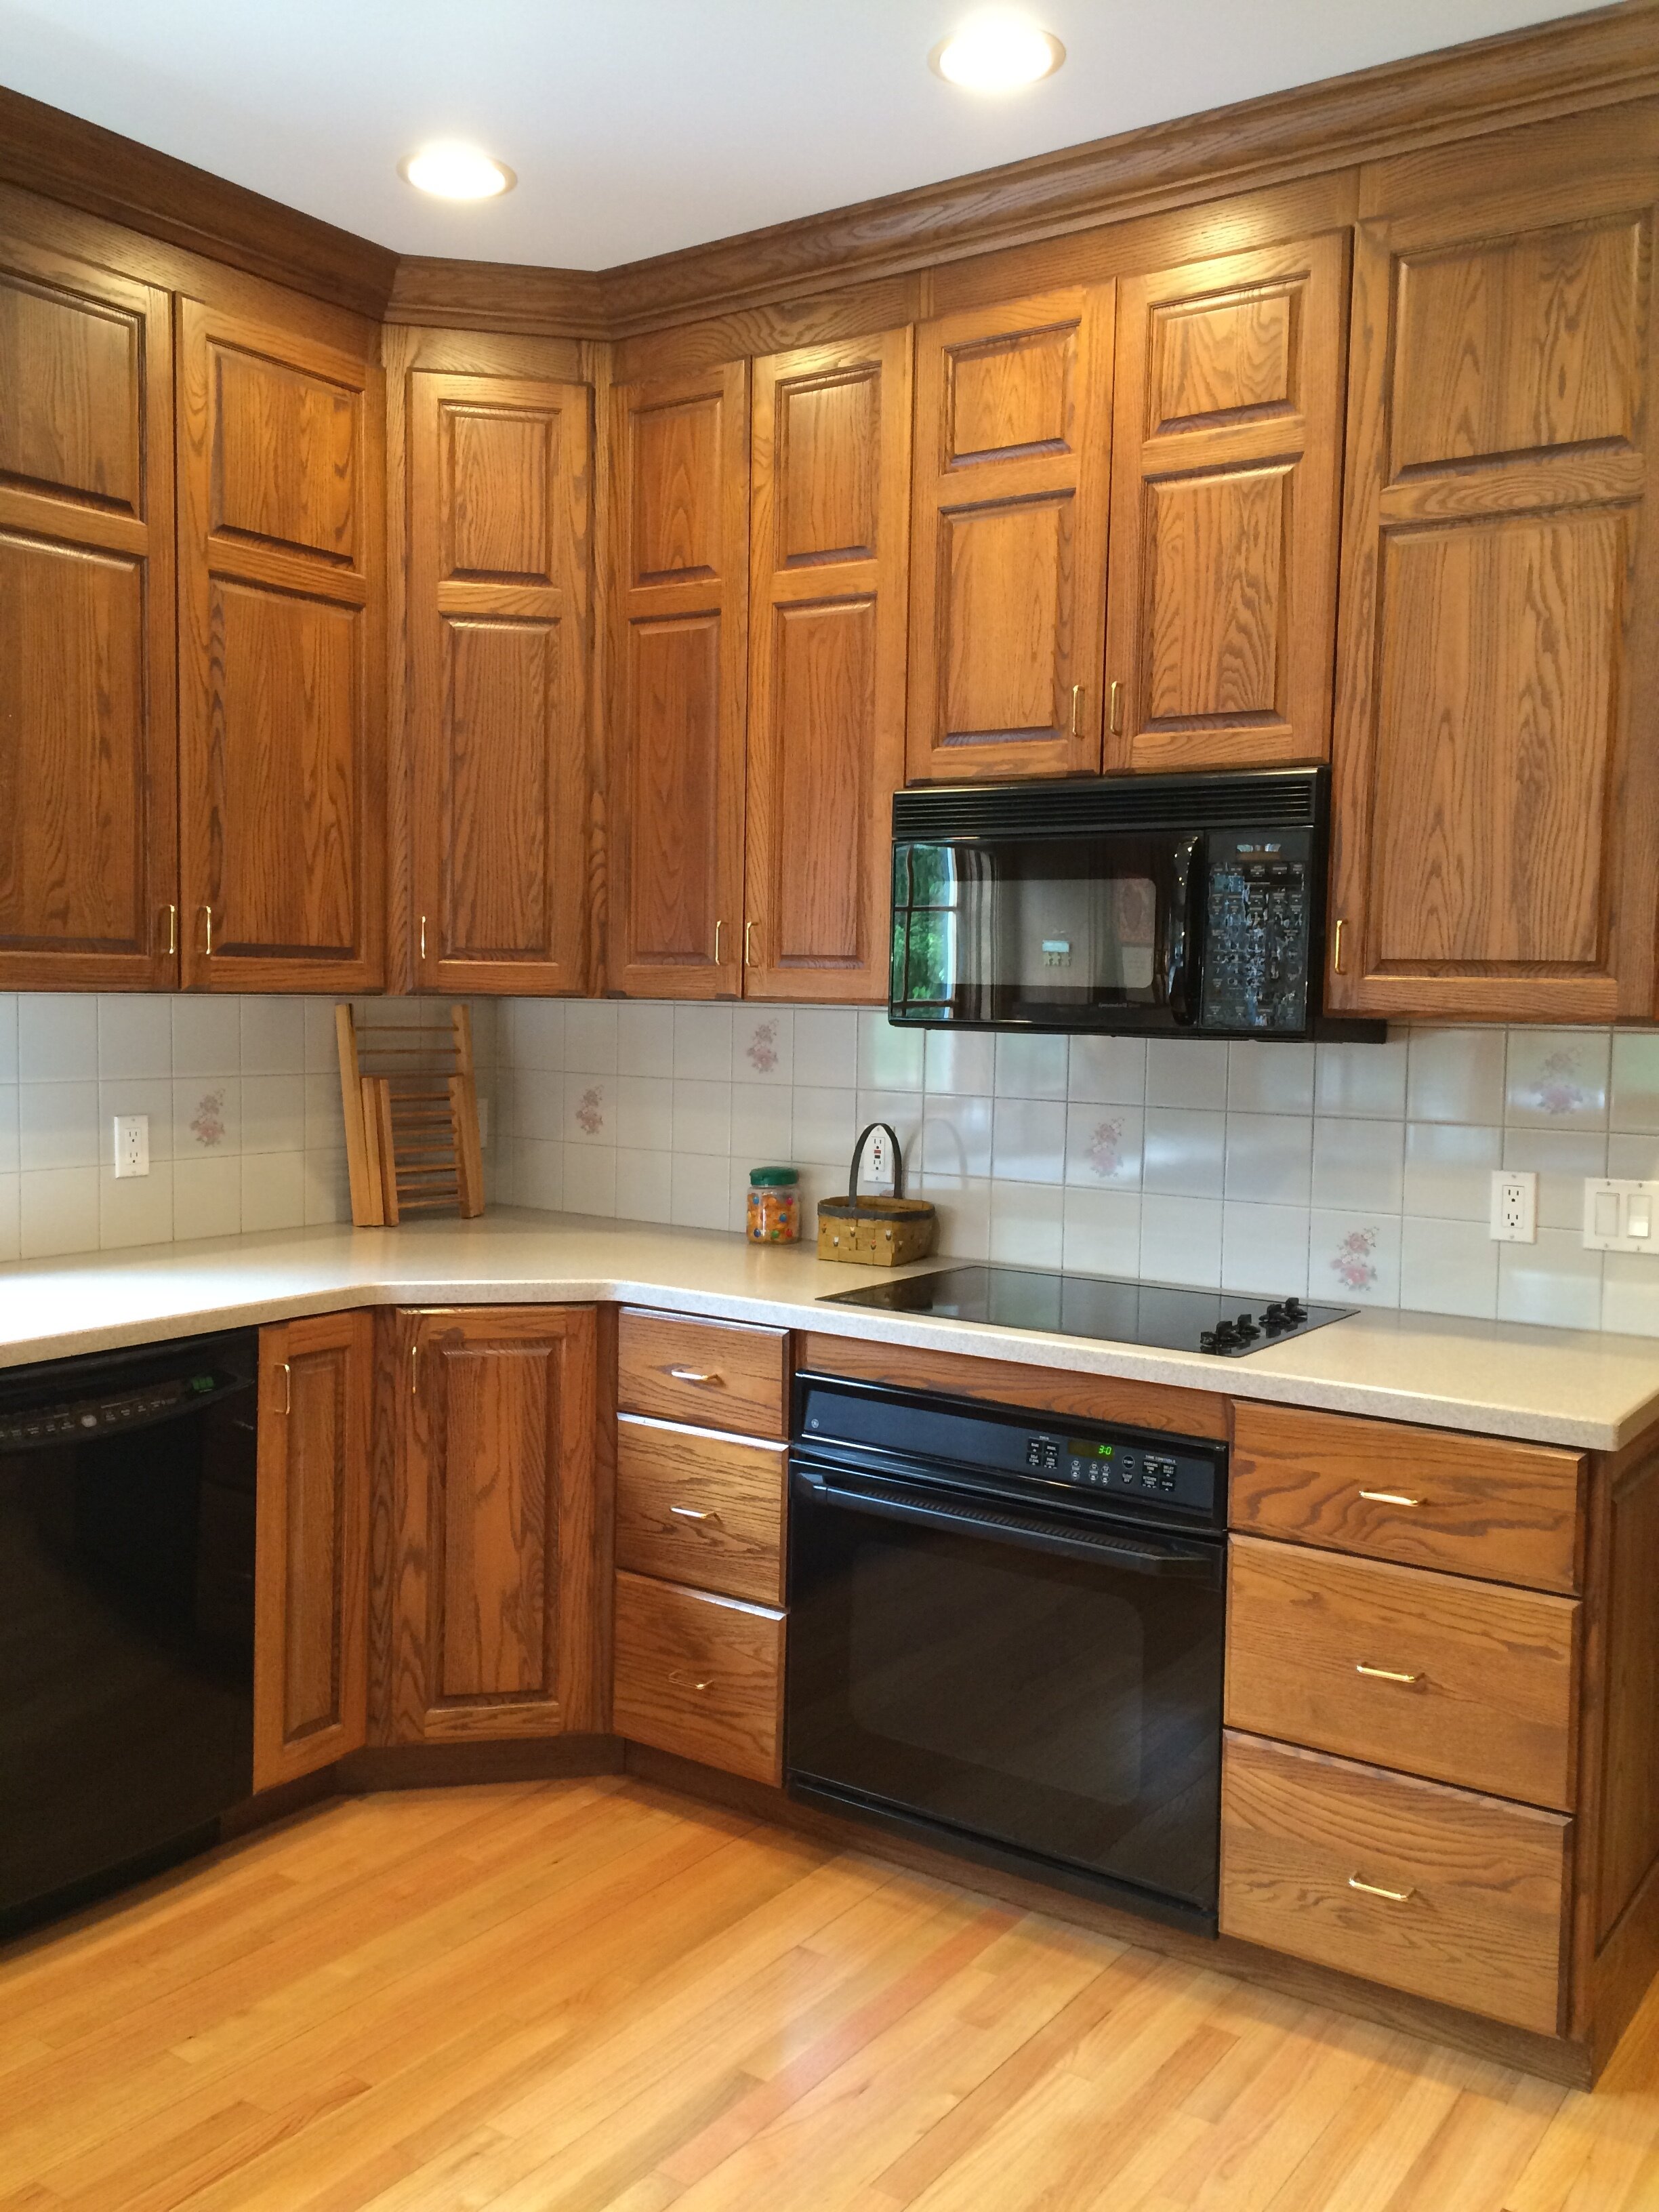 How To Make An Oak Kitchen Cool Again, What Color Floor Tiles Go With Oak Cabinets